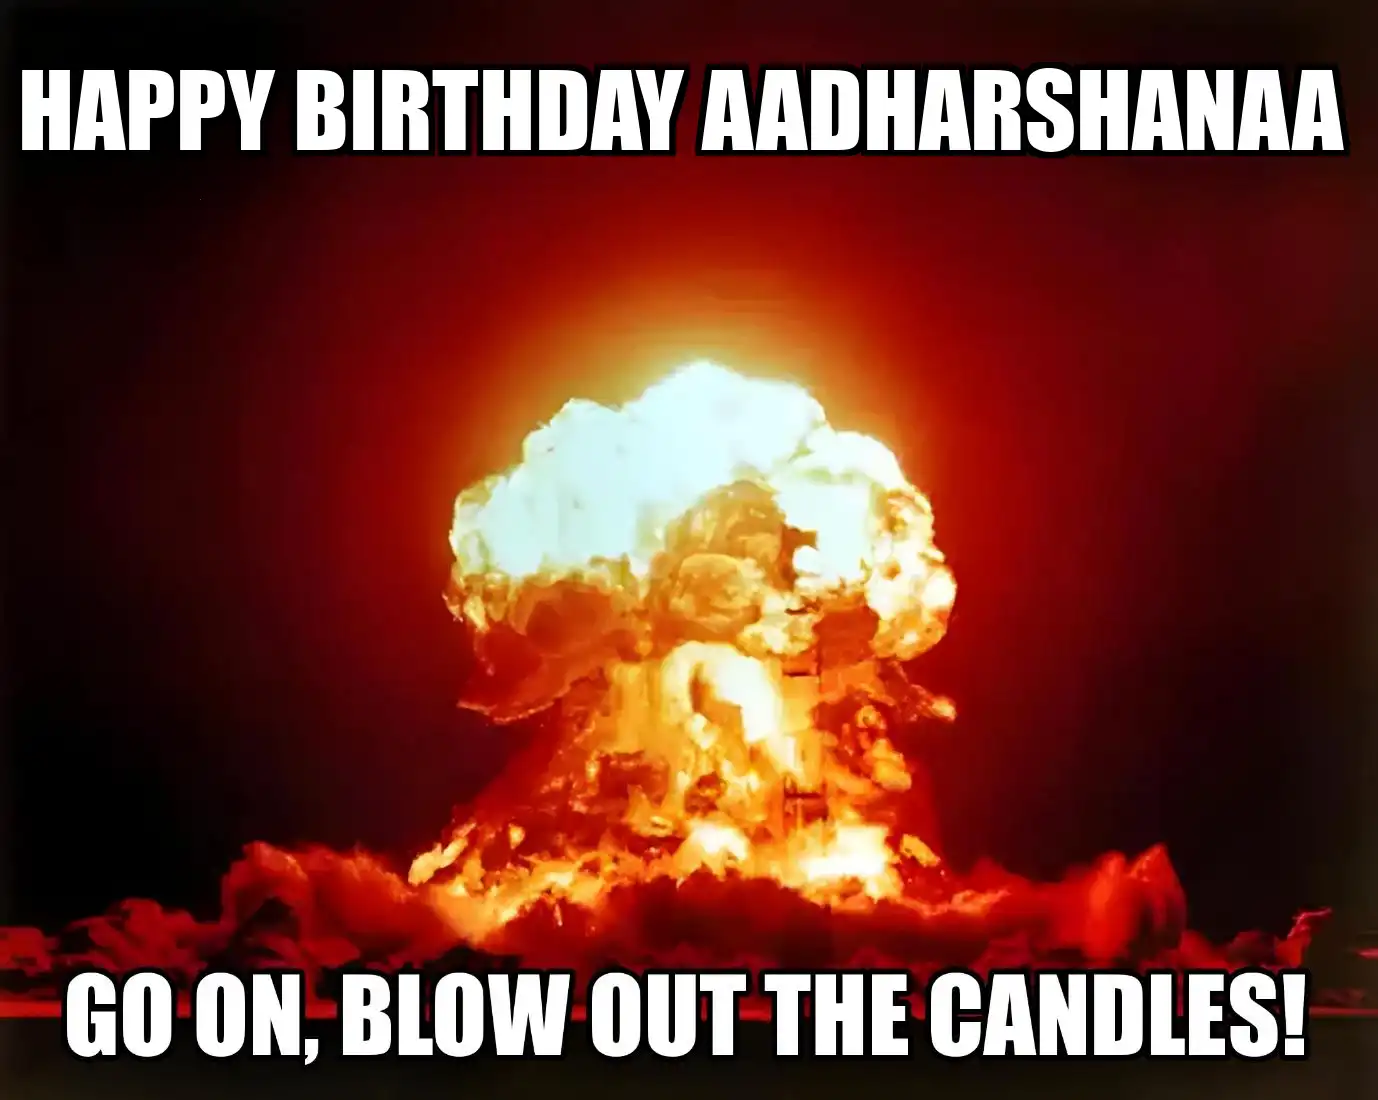 Happy Birthday Aadharshanaa Go On Blow Out The Candles Meme